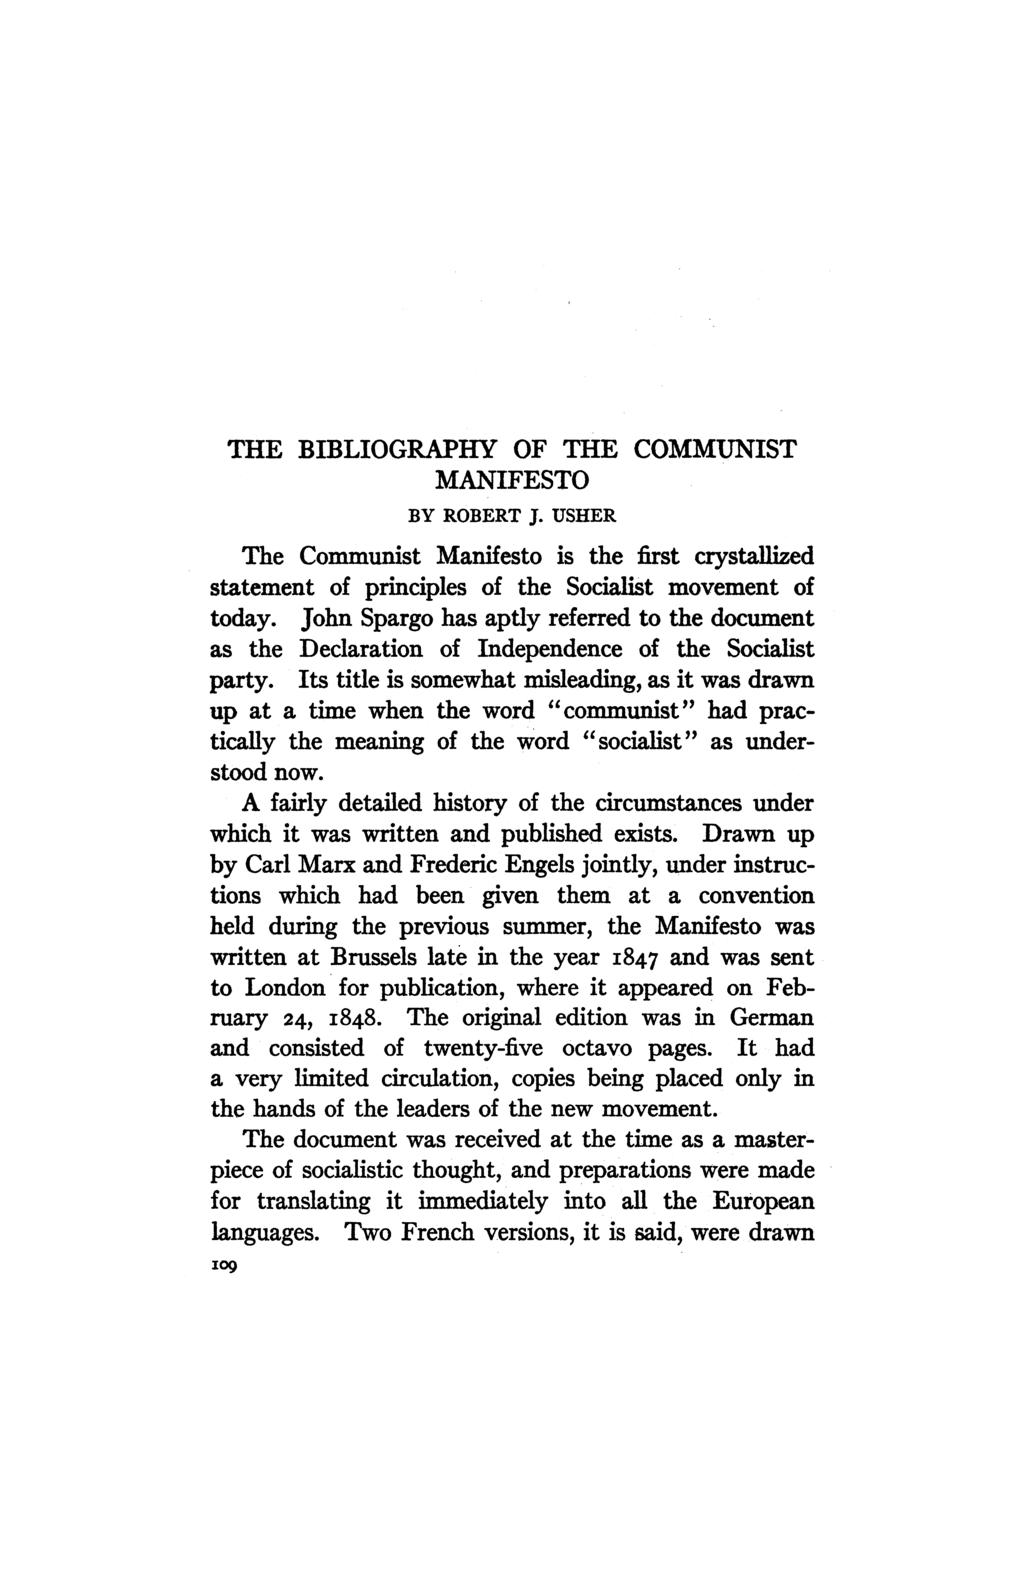 THE BIBLIOGRAPHY OF THE COMMUNIST MANIFESTO BY ROBERT J. USHER The Communist Manifesto is the first crystallized statement of principles of the Socialist movement of today.